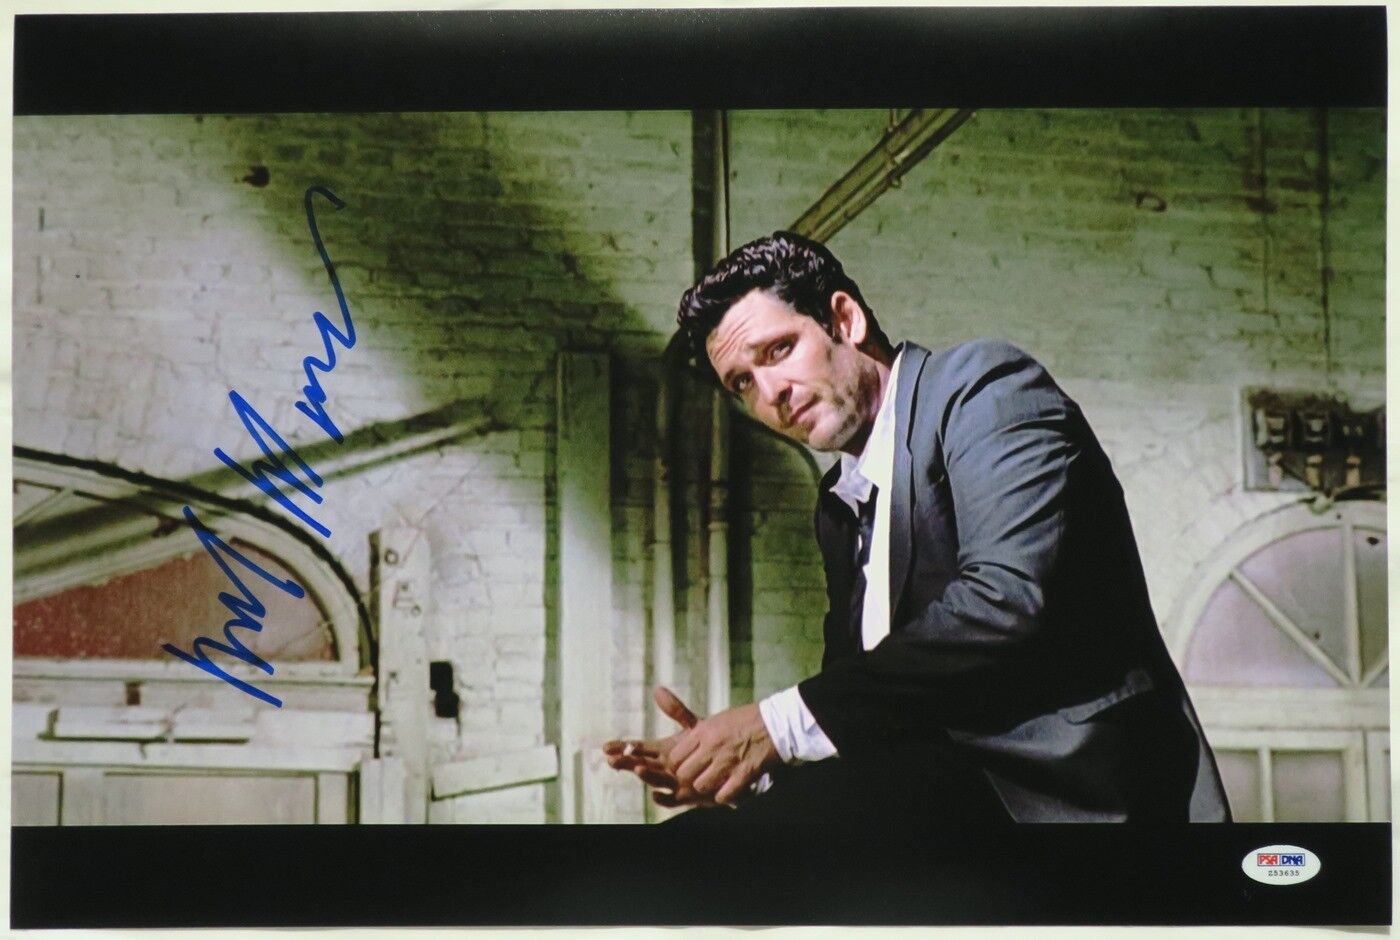 Michael Madsen Signed Reservoir Dogs Autographed 12x18 Photo Poster painting PSA/DNA #Z53635